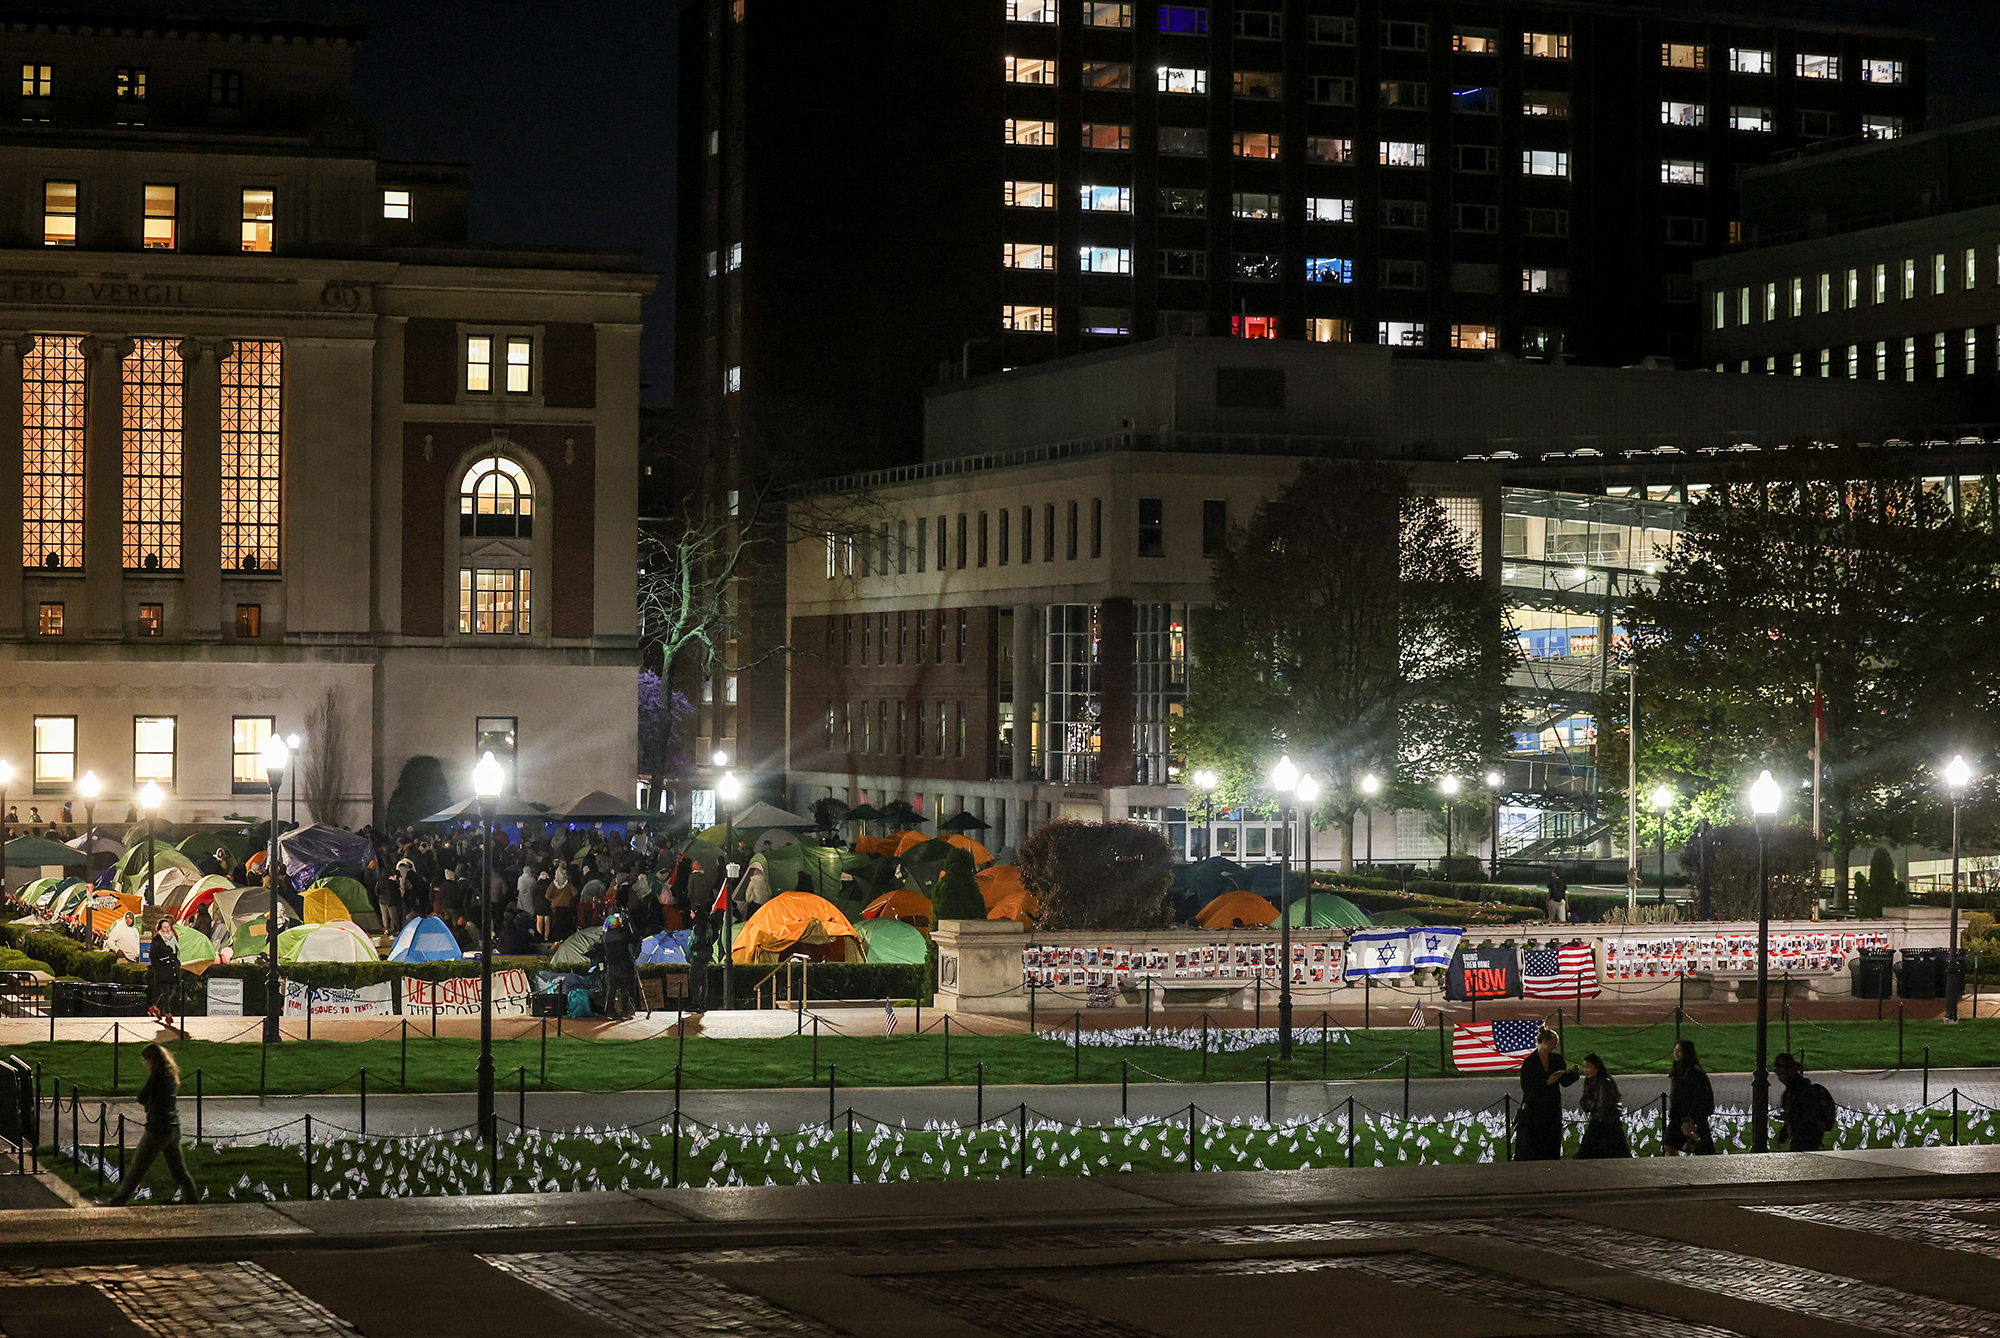 Students during the night of April 25 at the protest encampment in support of Palestinians at Columbia University.